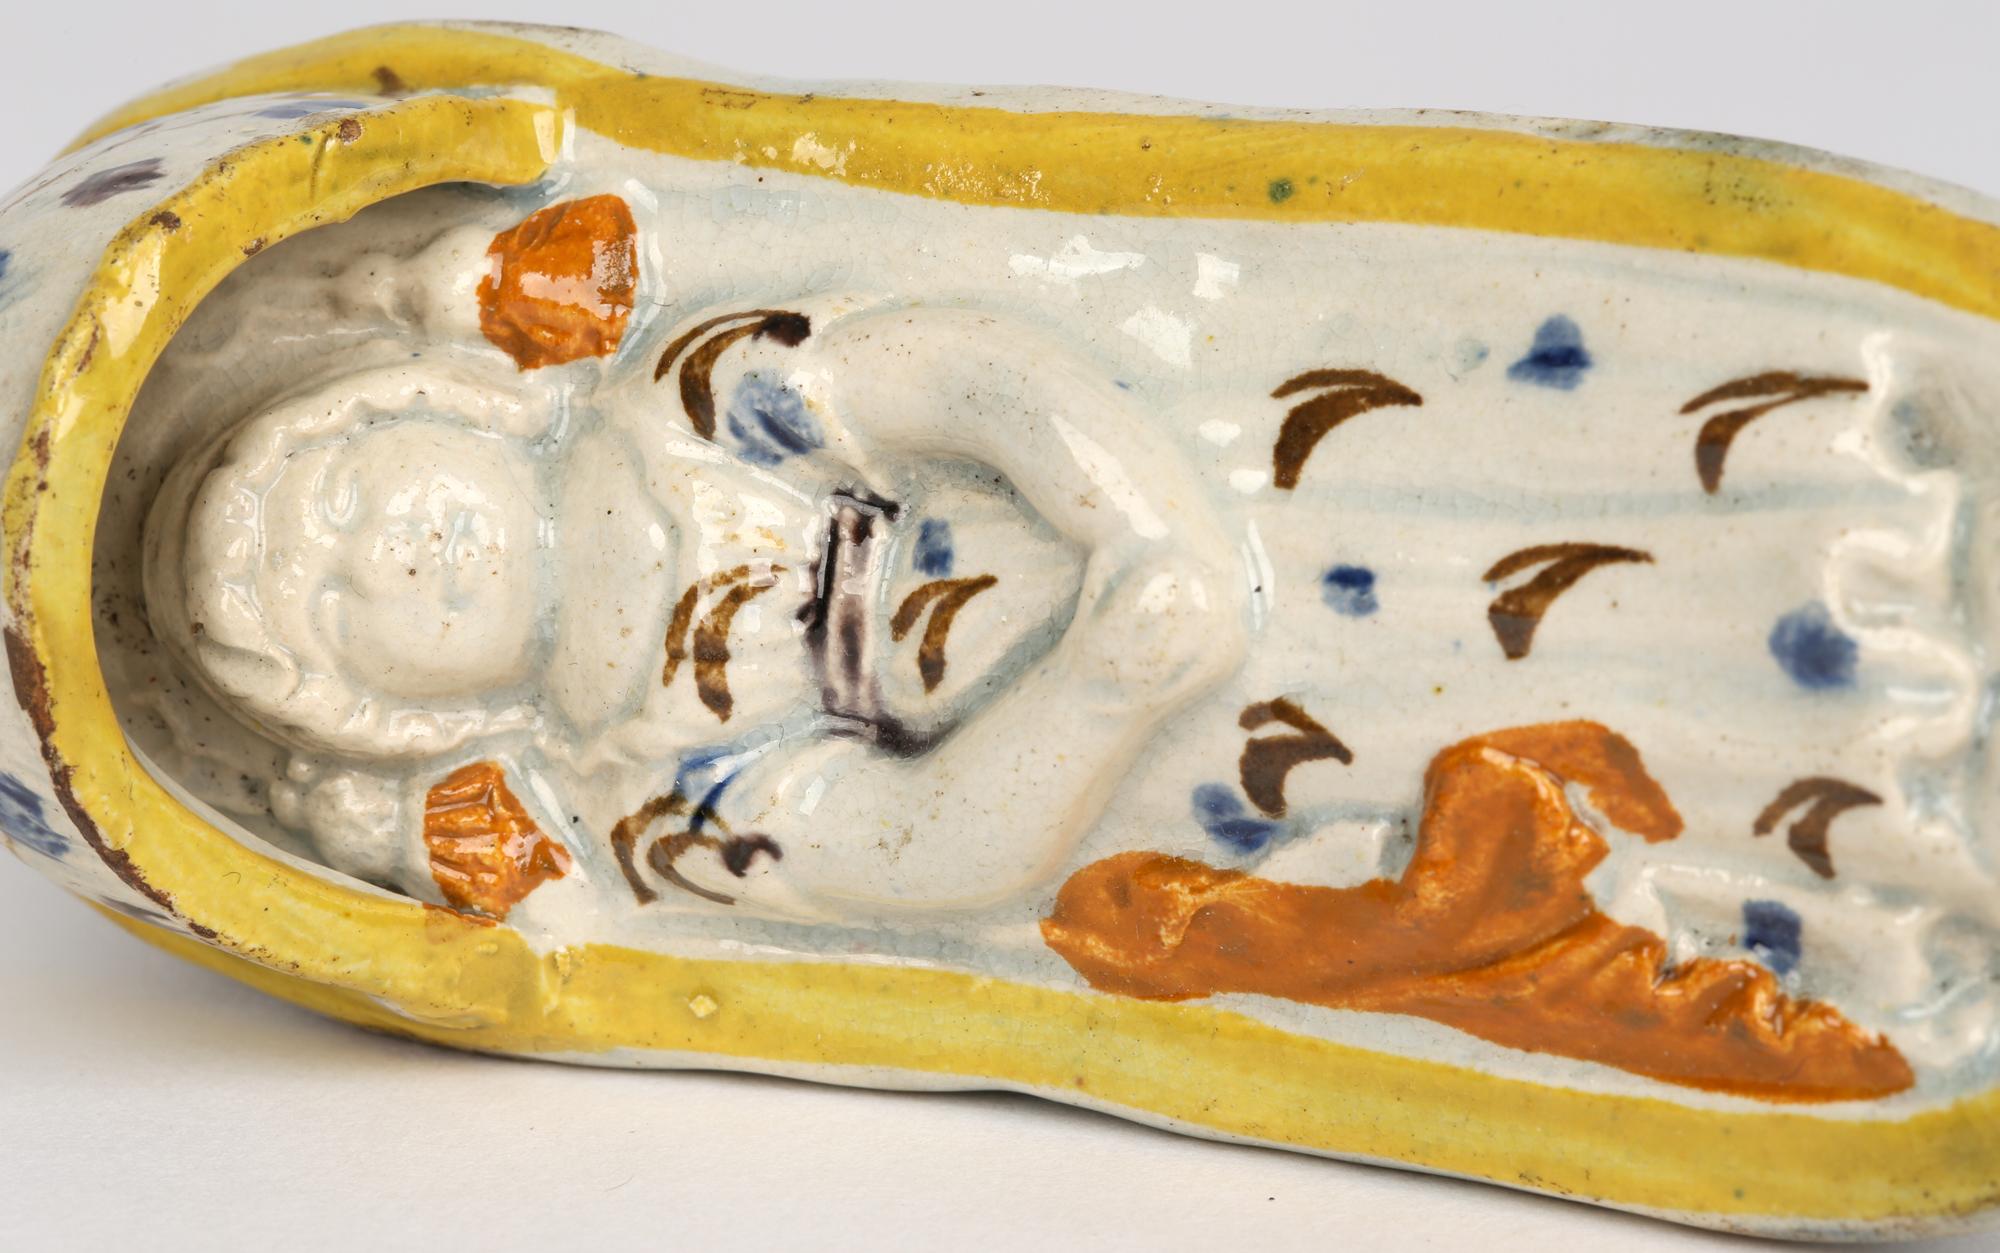 A fine antique Georgian English Prattware pottery cradle containing a sleeping child dating from around 1800. The cradle sits raised on two rockers and modelled as a basket with a hood over one end. The child lies within the cradle asleep. The